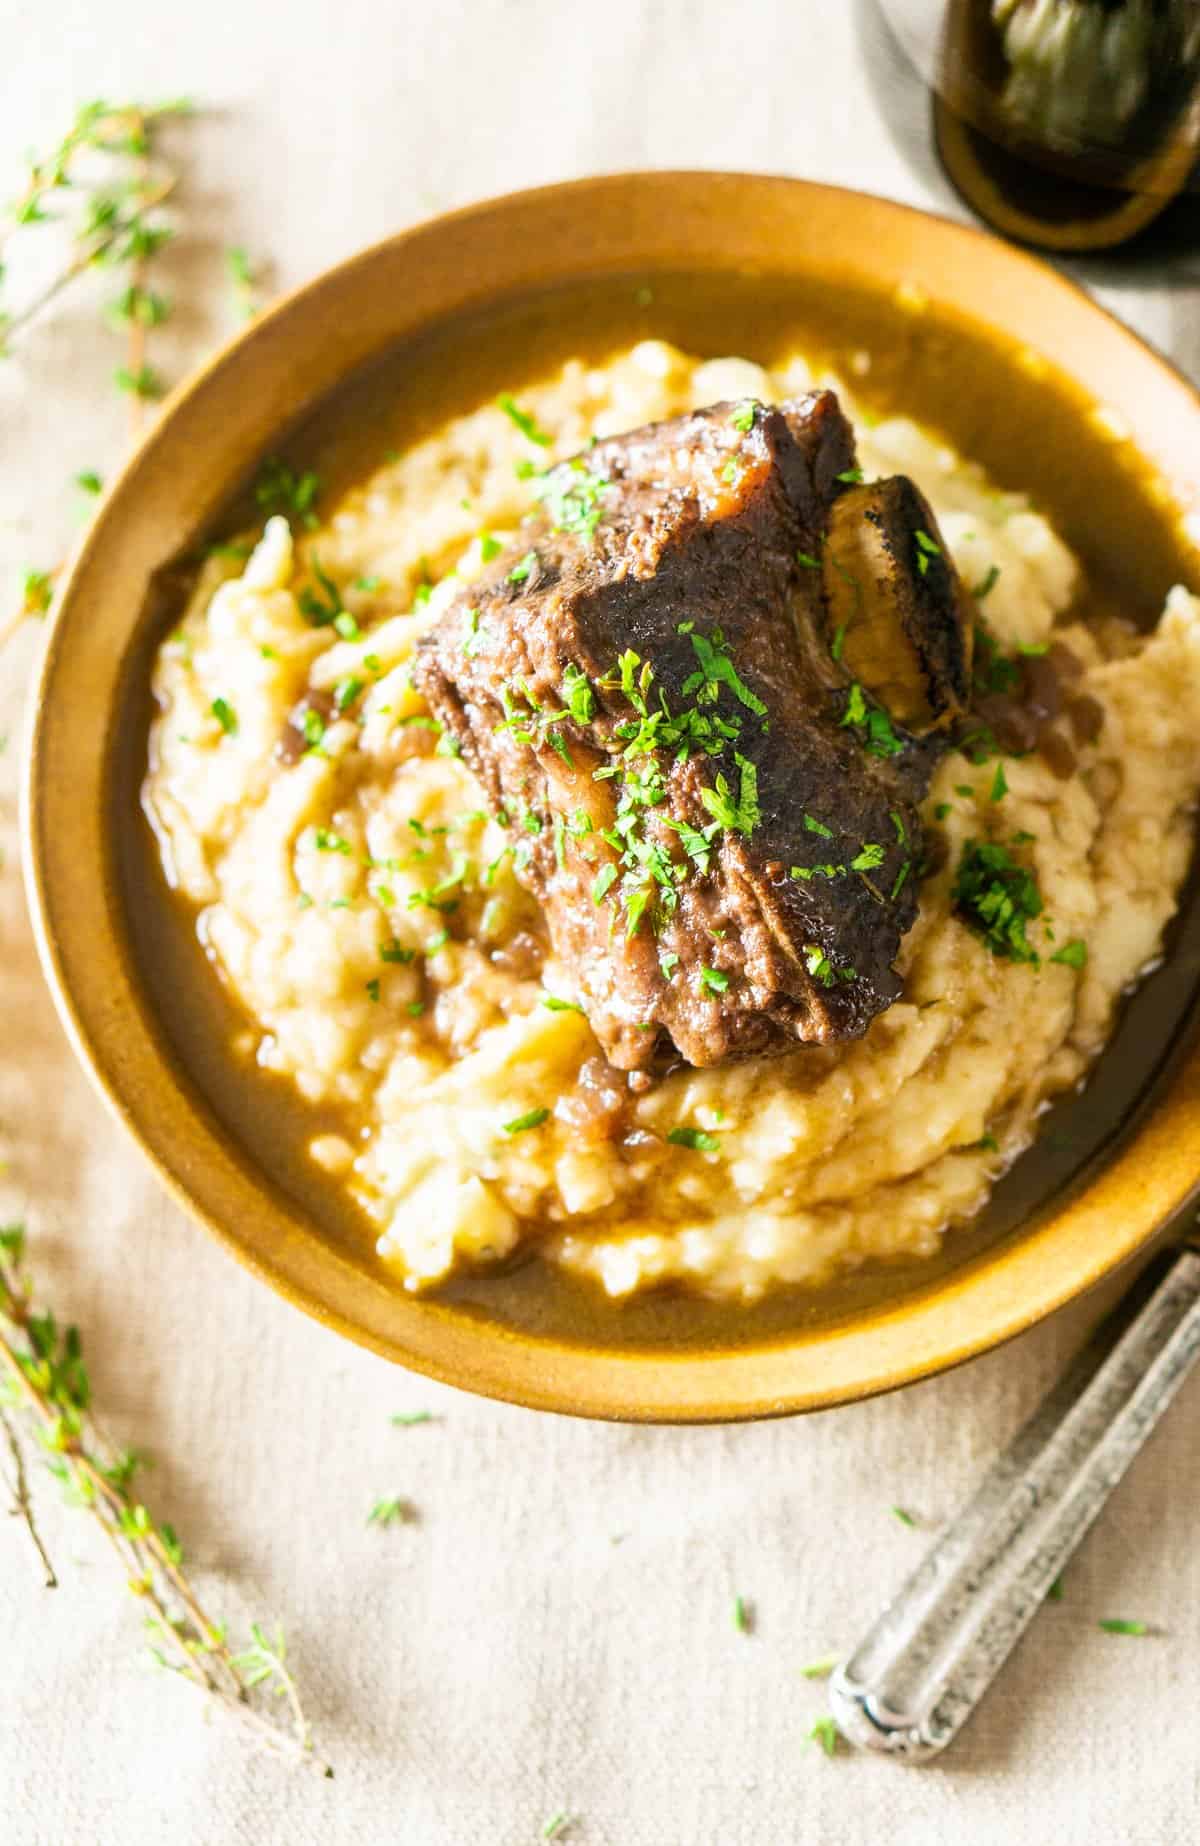 An aerial shot of the red wine-braised short ribs in a bowl of mashed potatoes.